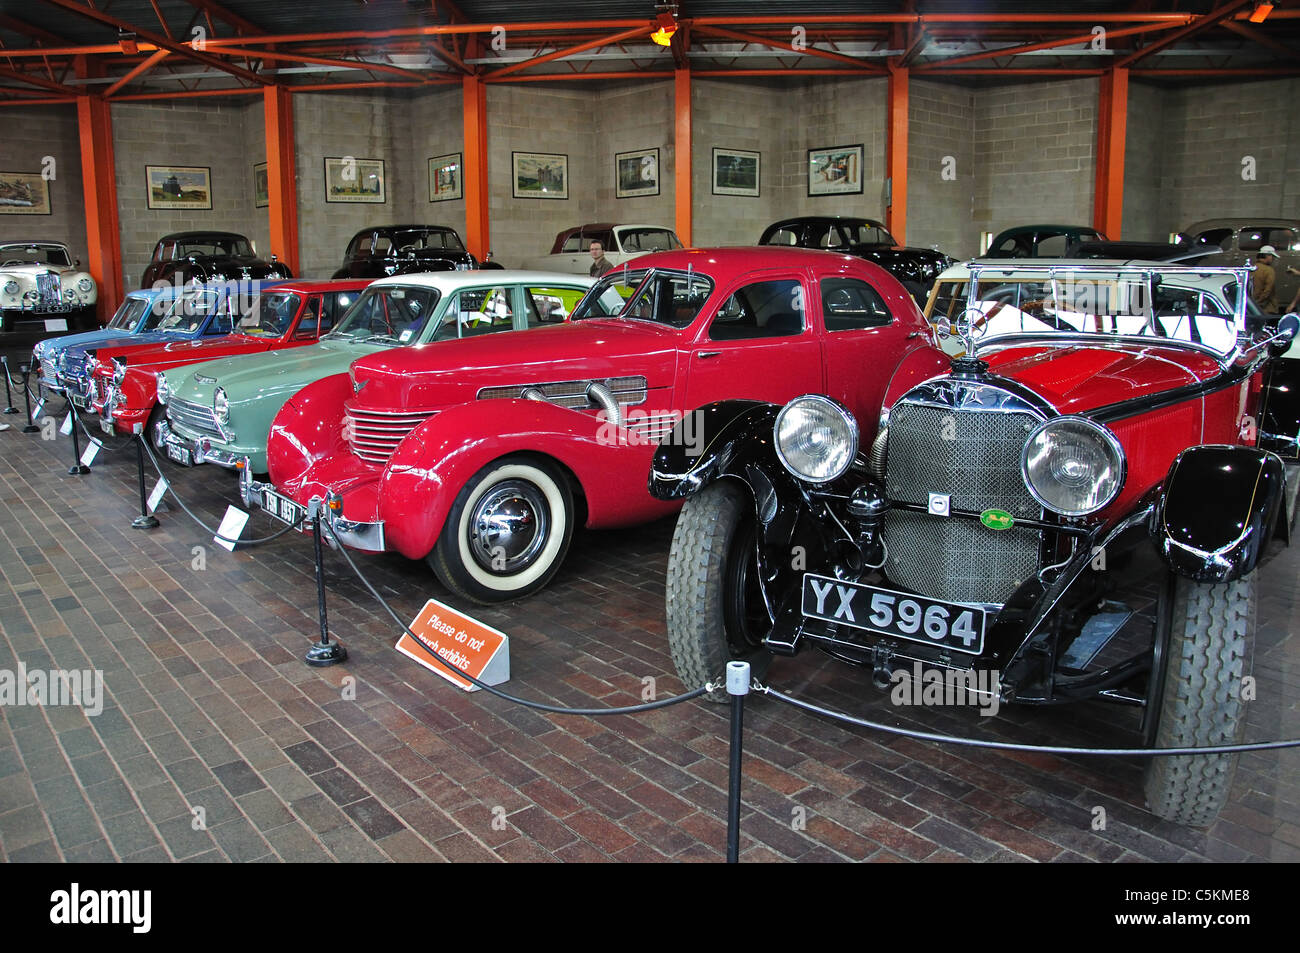 Classic cars at The National Motor Museum, Beaulieu, New Forest District, Hampshire, England, United Kingdom Stock Photo